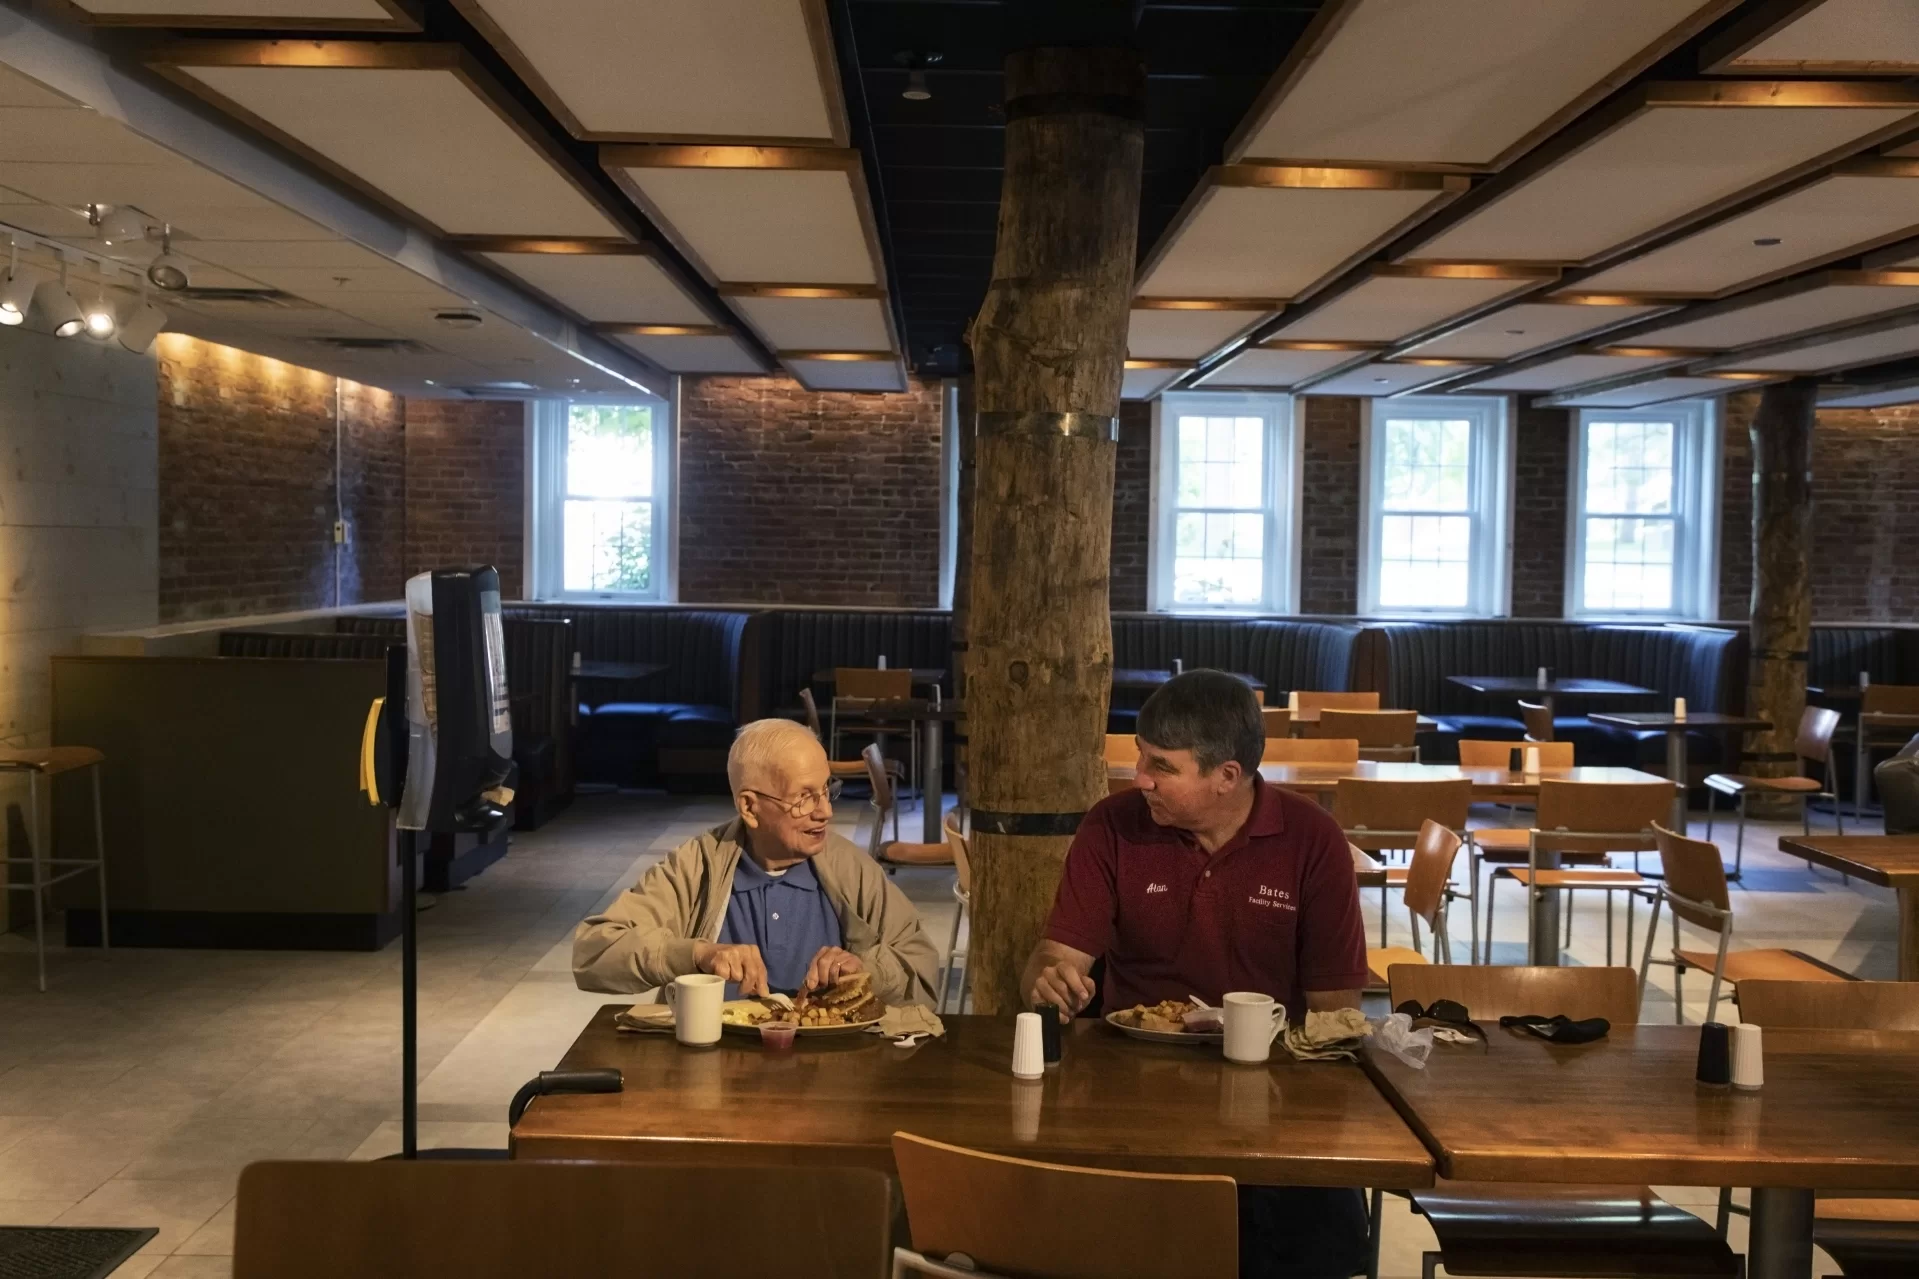 Ralph Sylvester '50, age 97, and Alan Kelley of Bates Facility Services renew a morning routine, having breakfast together in the Bobcat Den, which reopened Aug. 17 after being closed since March 20, 2020, due to the pandemic. (Theophil Syslo/Bates College)